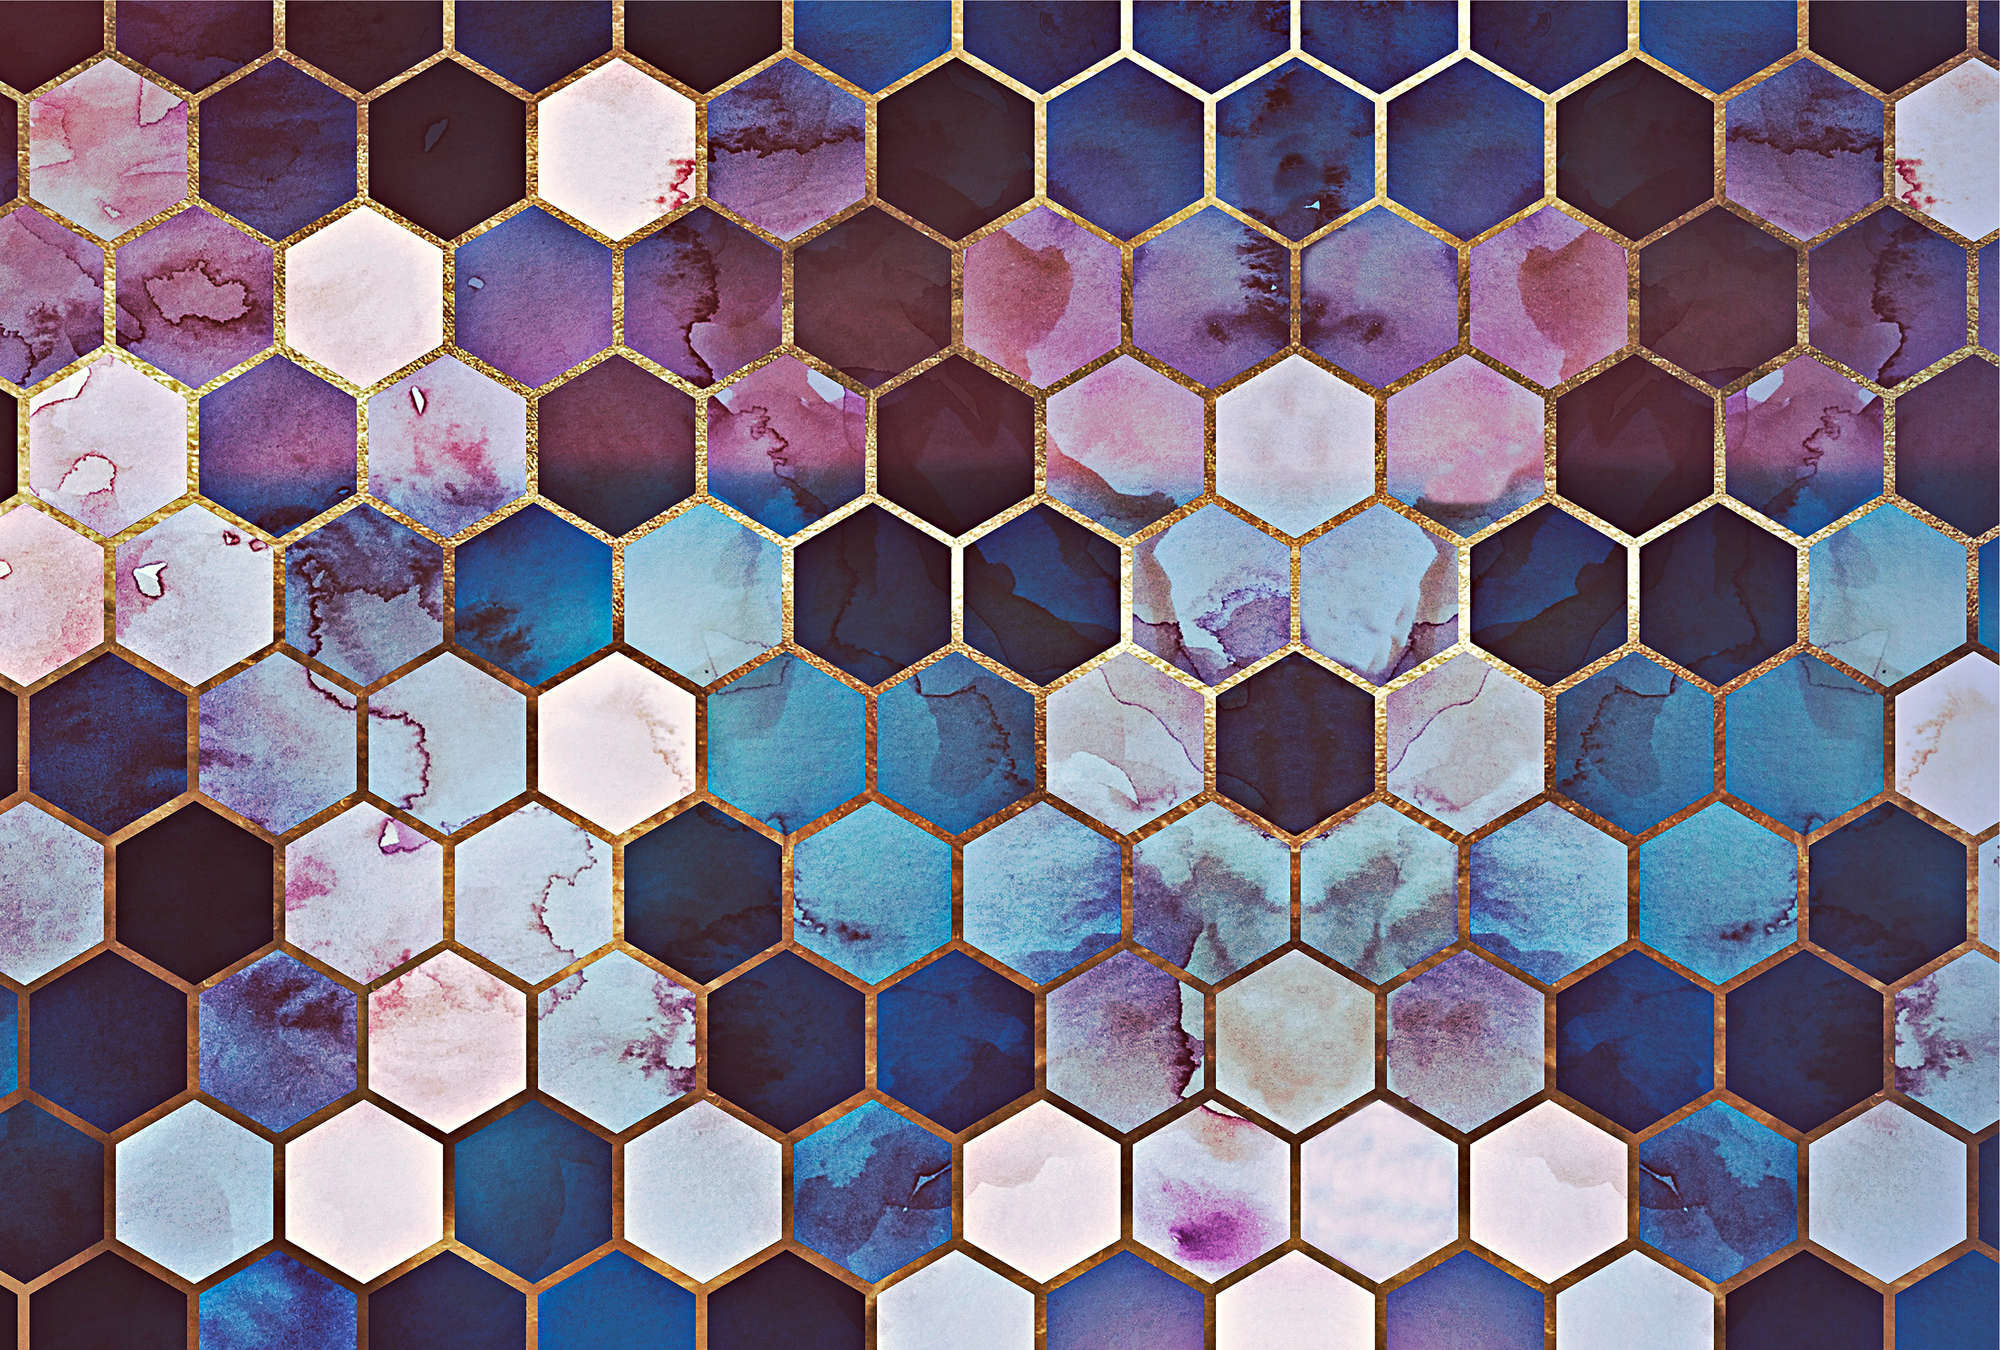             Watercolour marble mural with golden honeycomb pattern
        